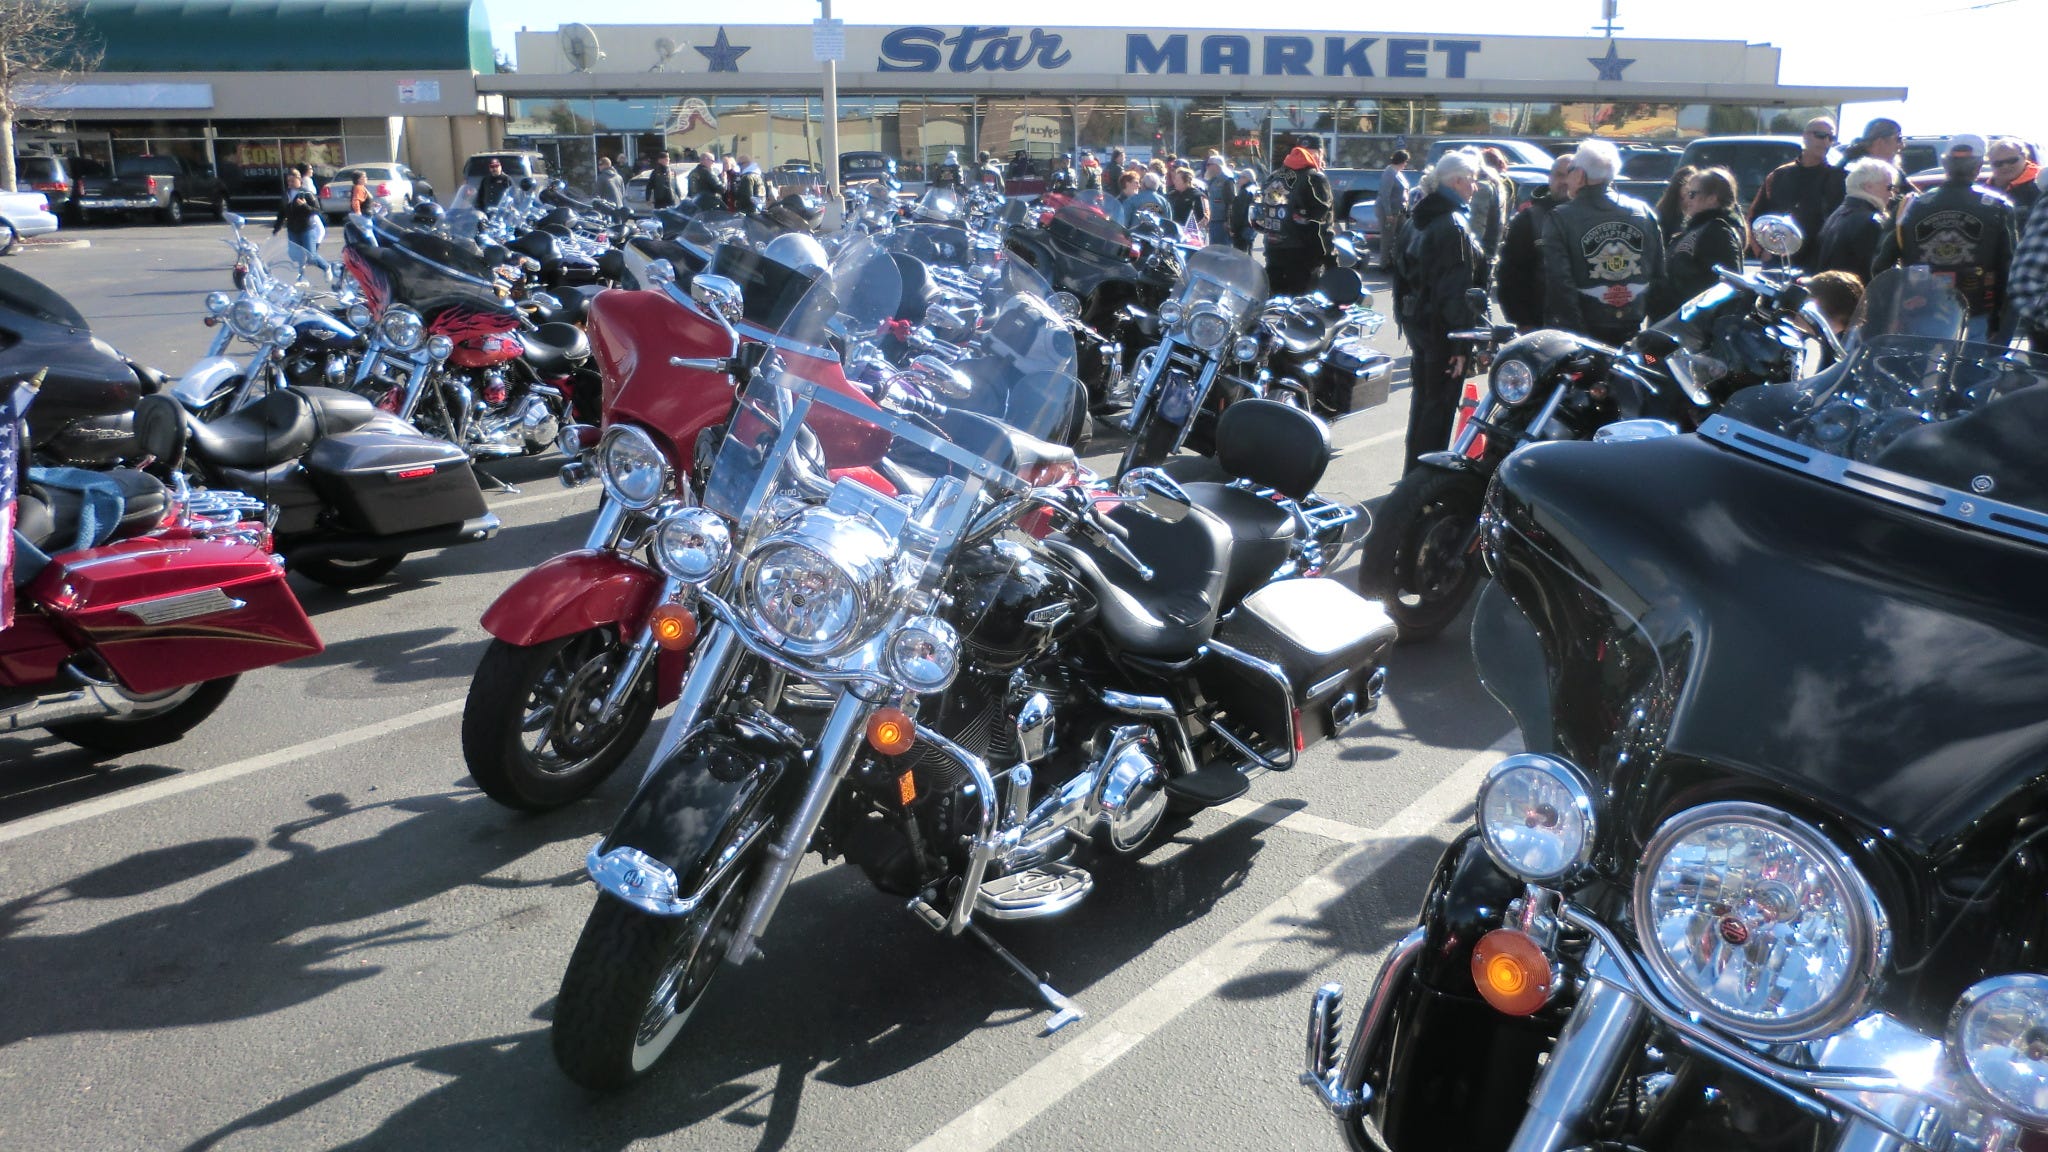 Outlaw motorcycle club to hold meeting in Palm Springs this weekend